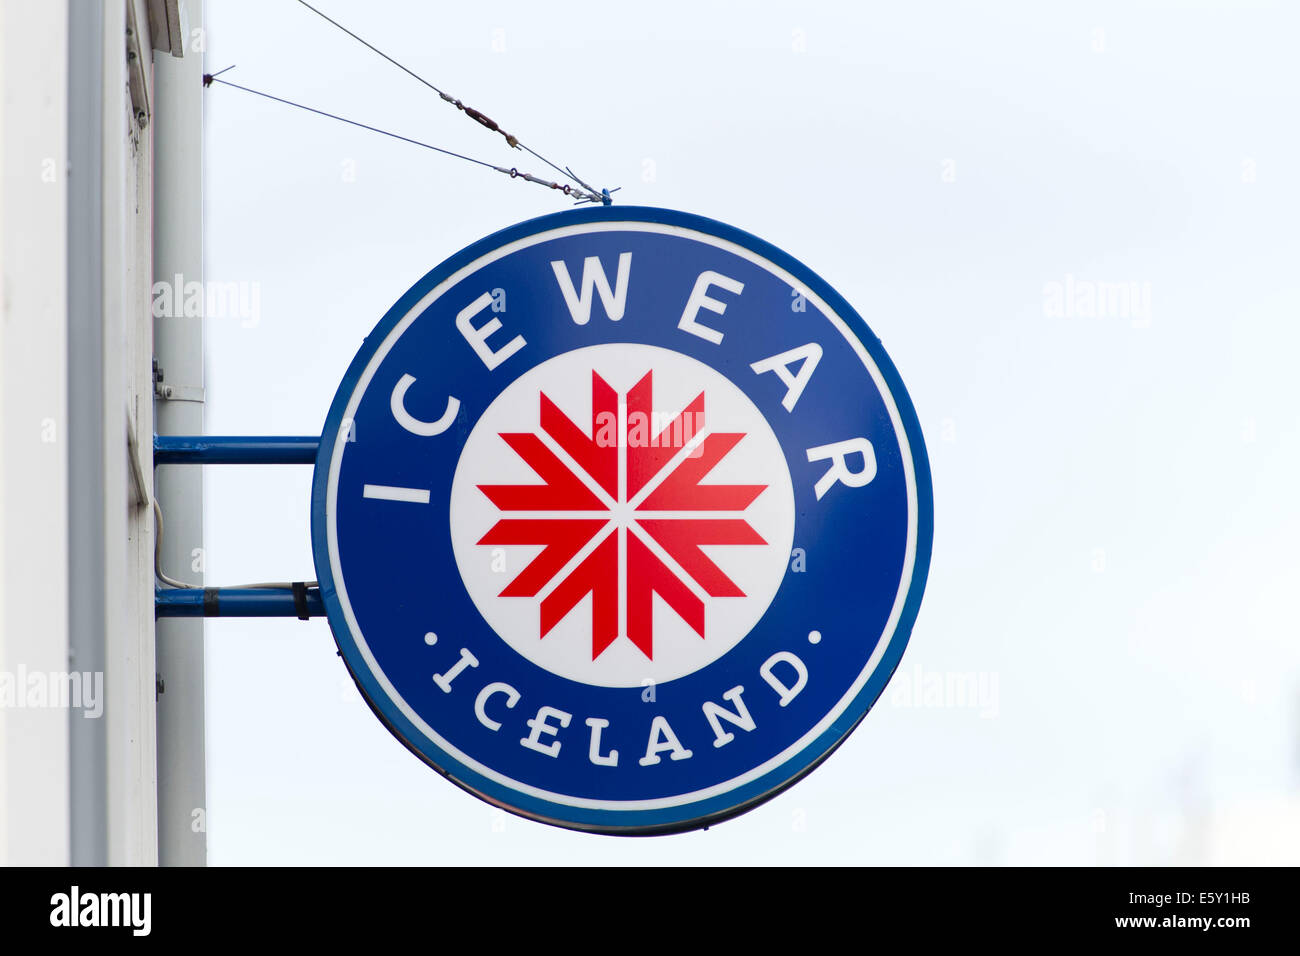 Icewear clothing sign in Iceland. Stock Photo